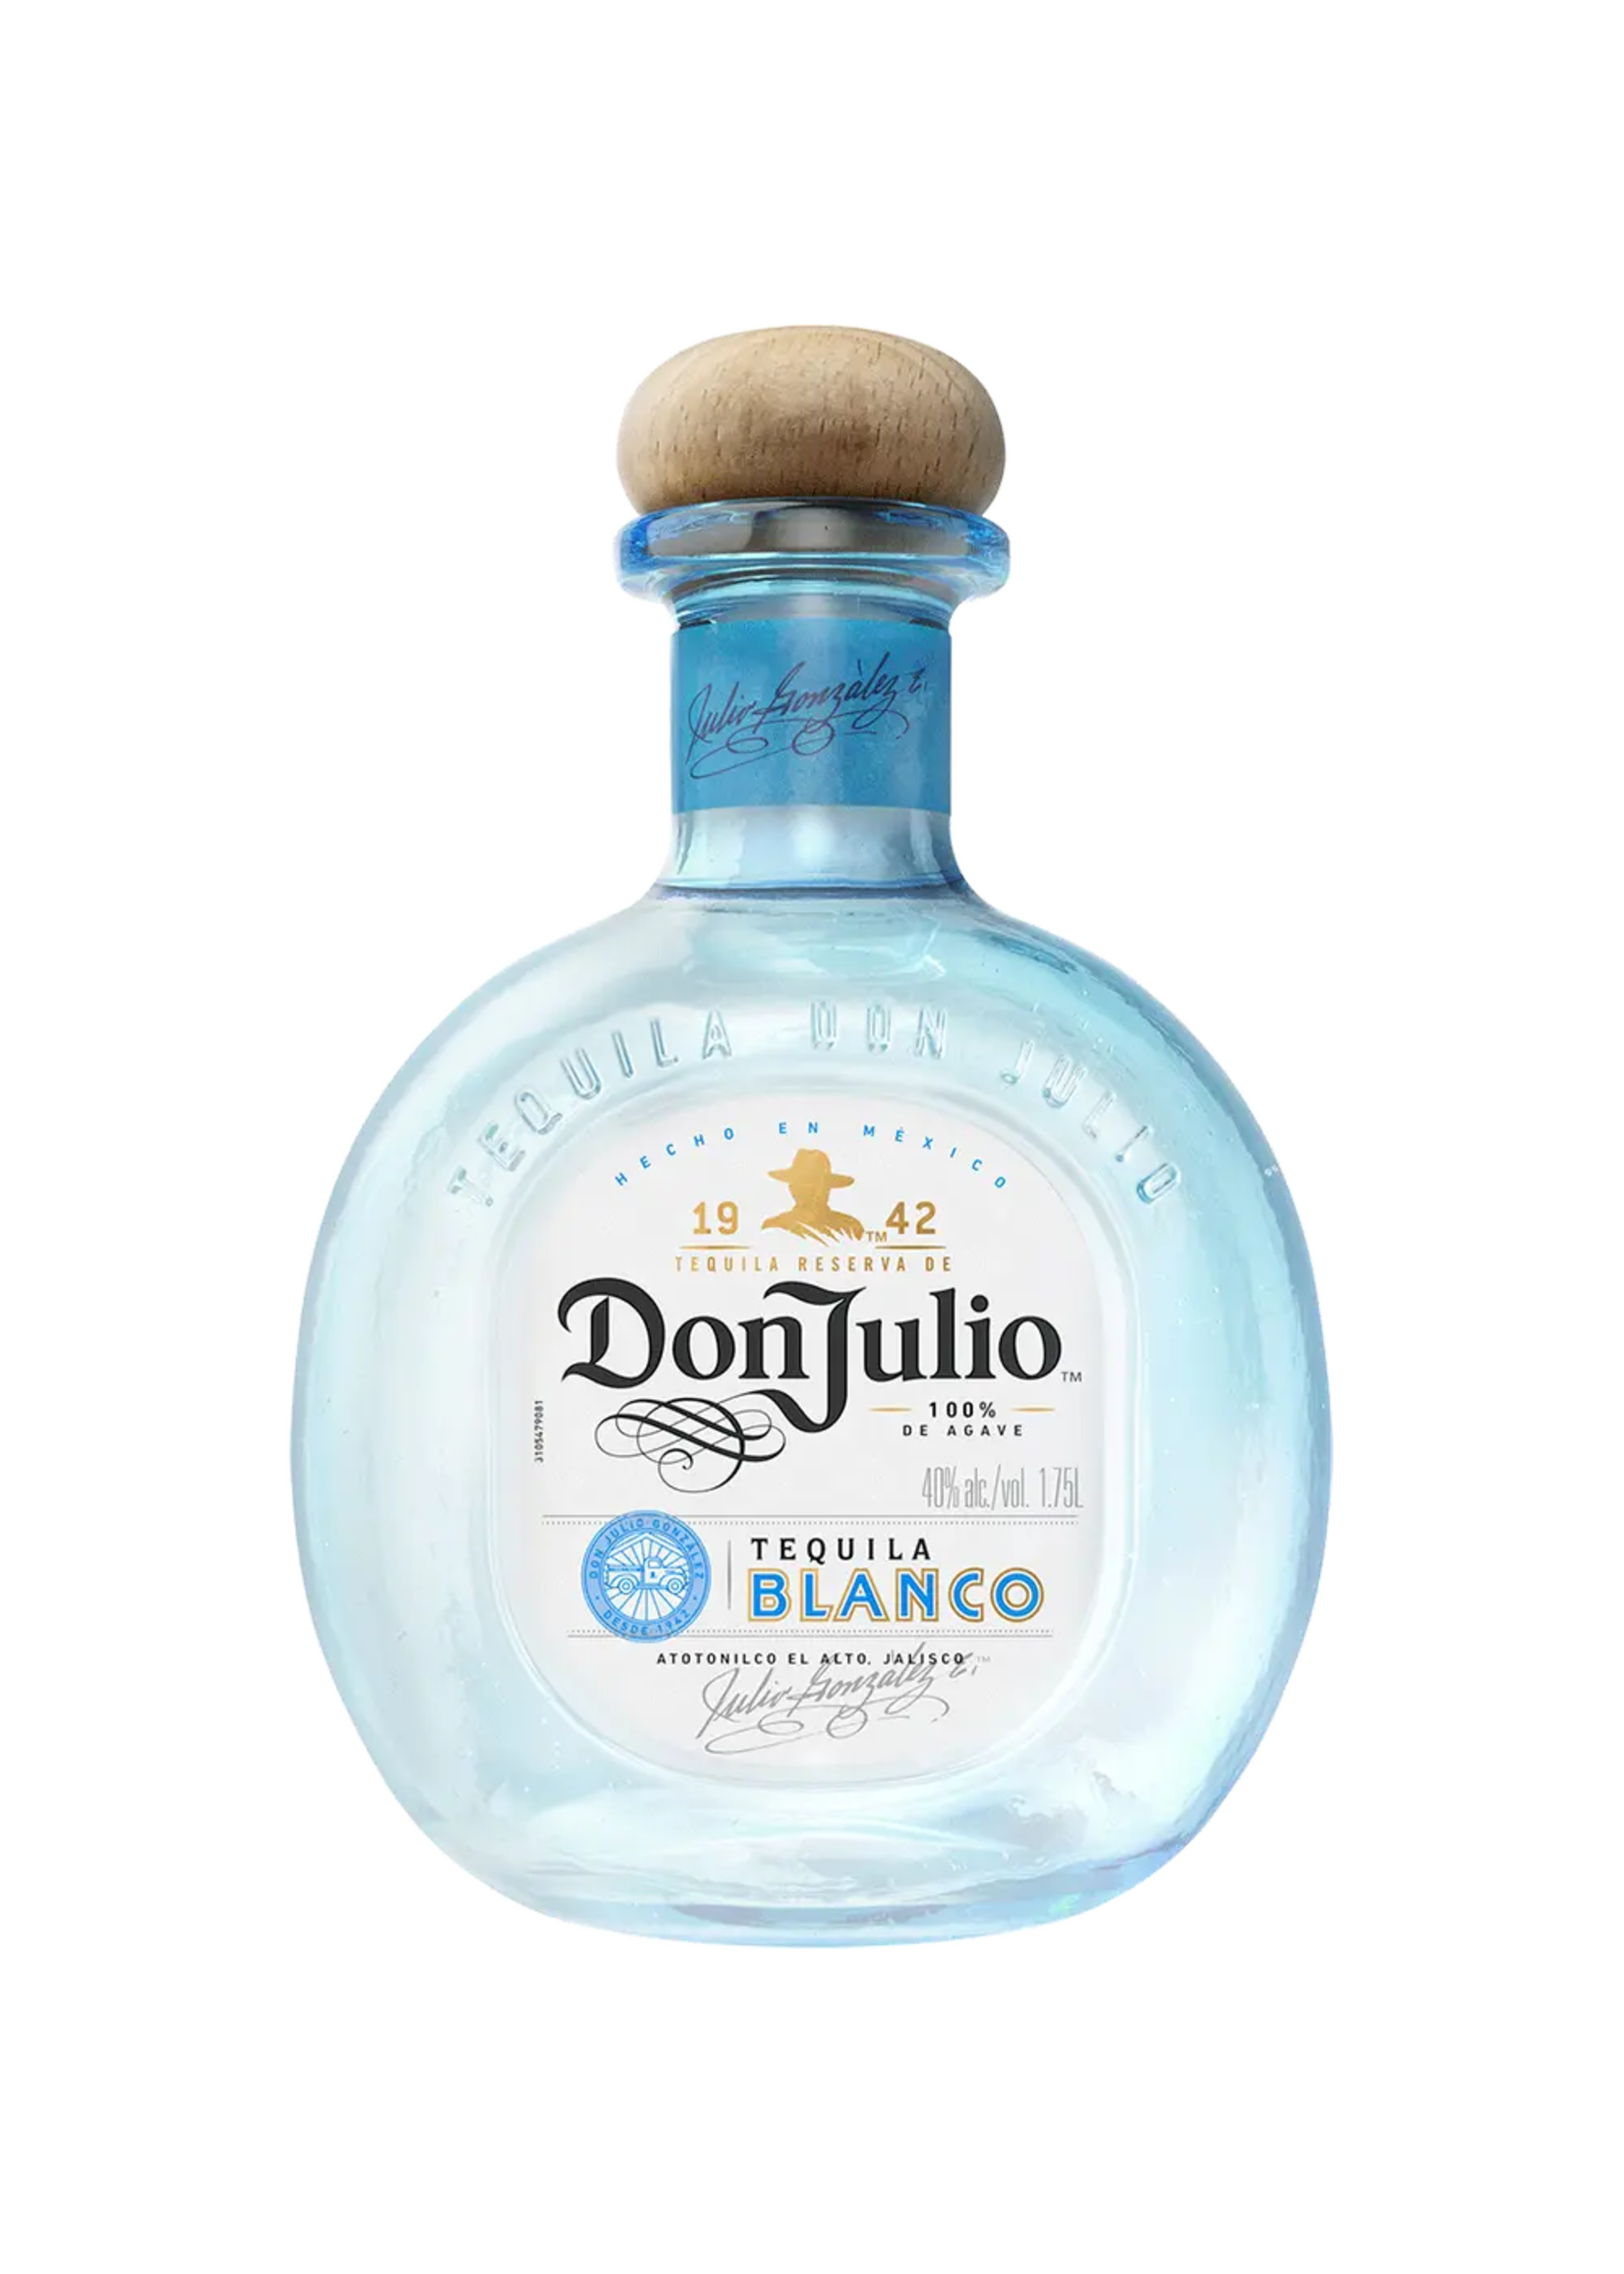 Don Julio Don Julio Blanco Tequila 80Proof 1.75 Ltr